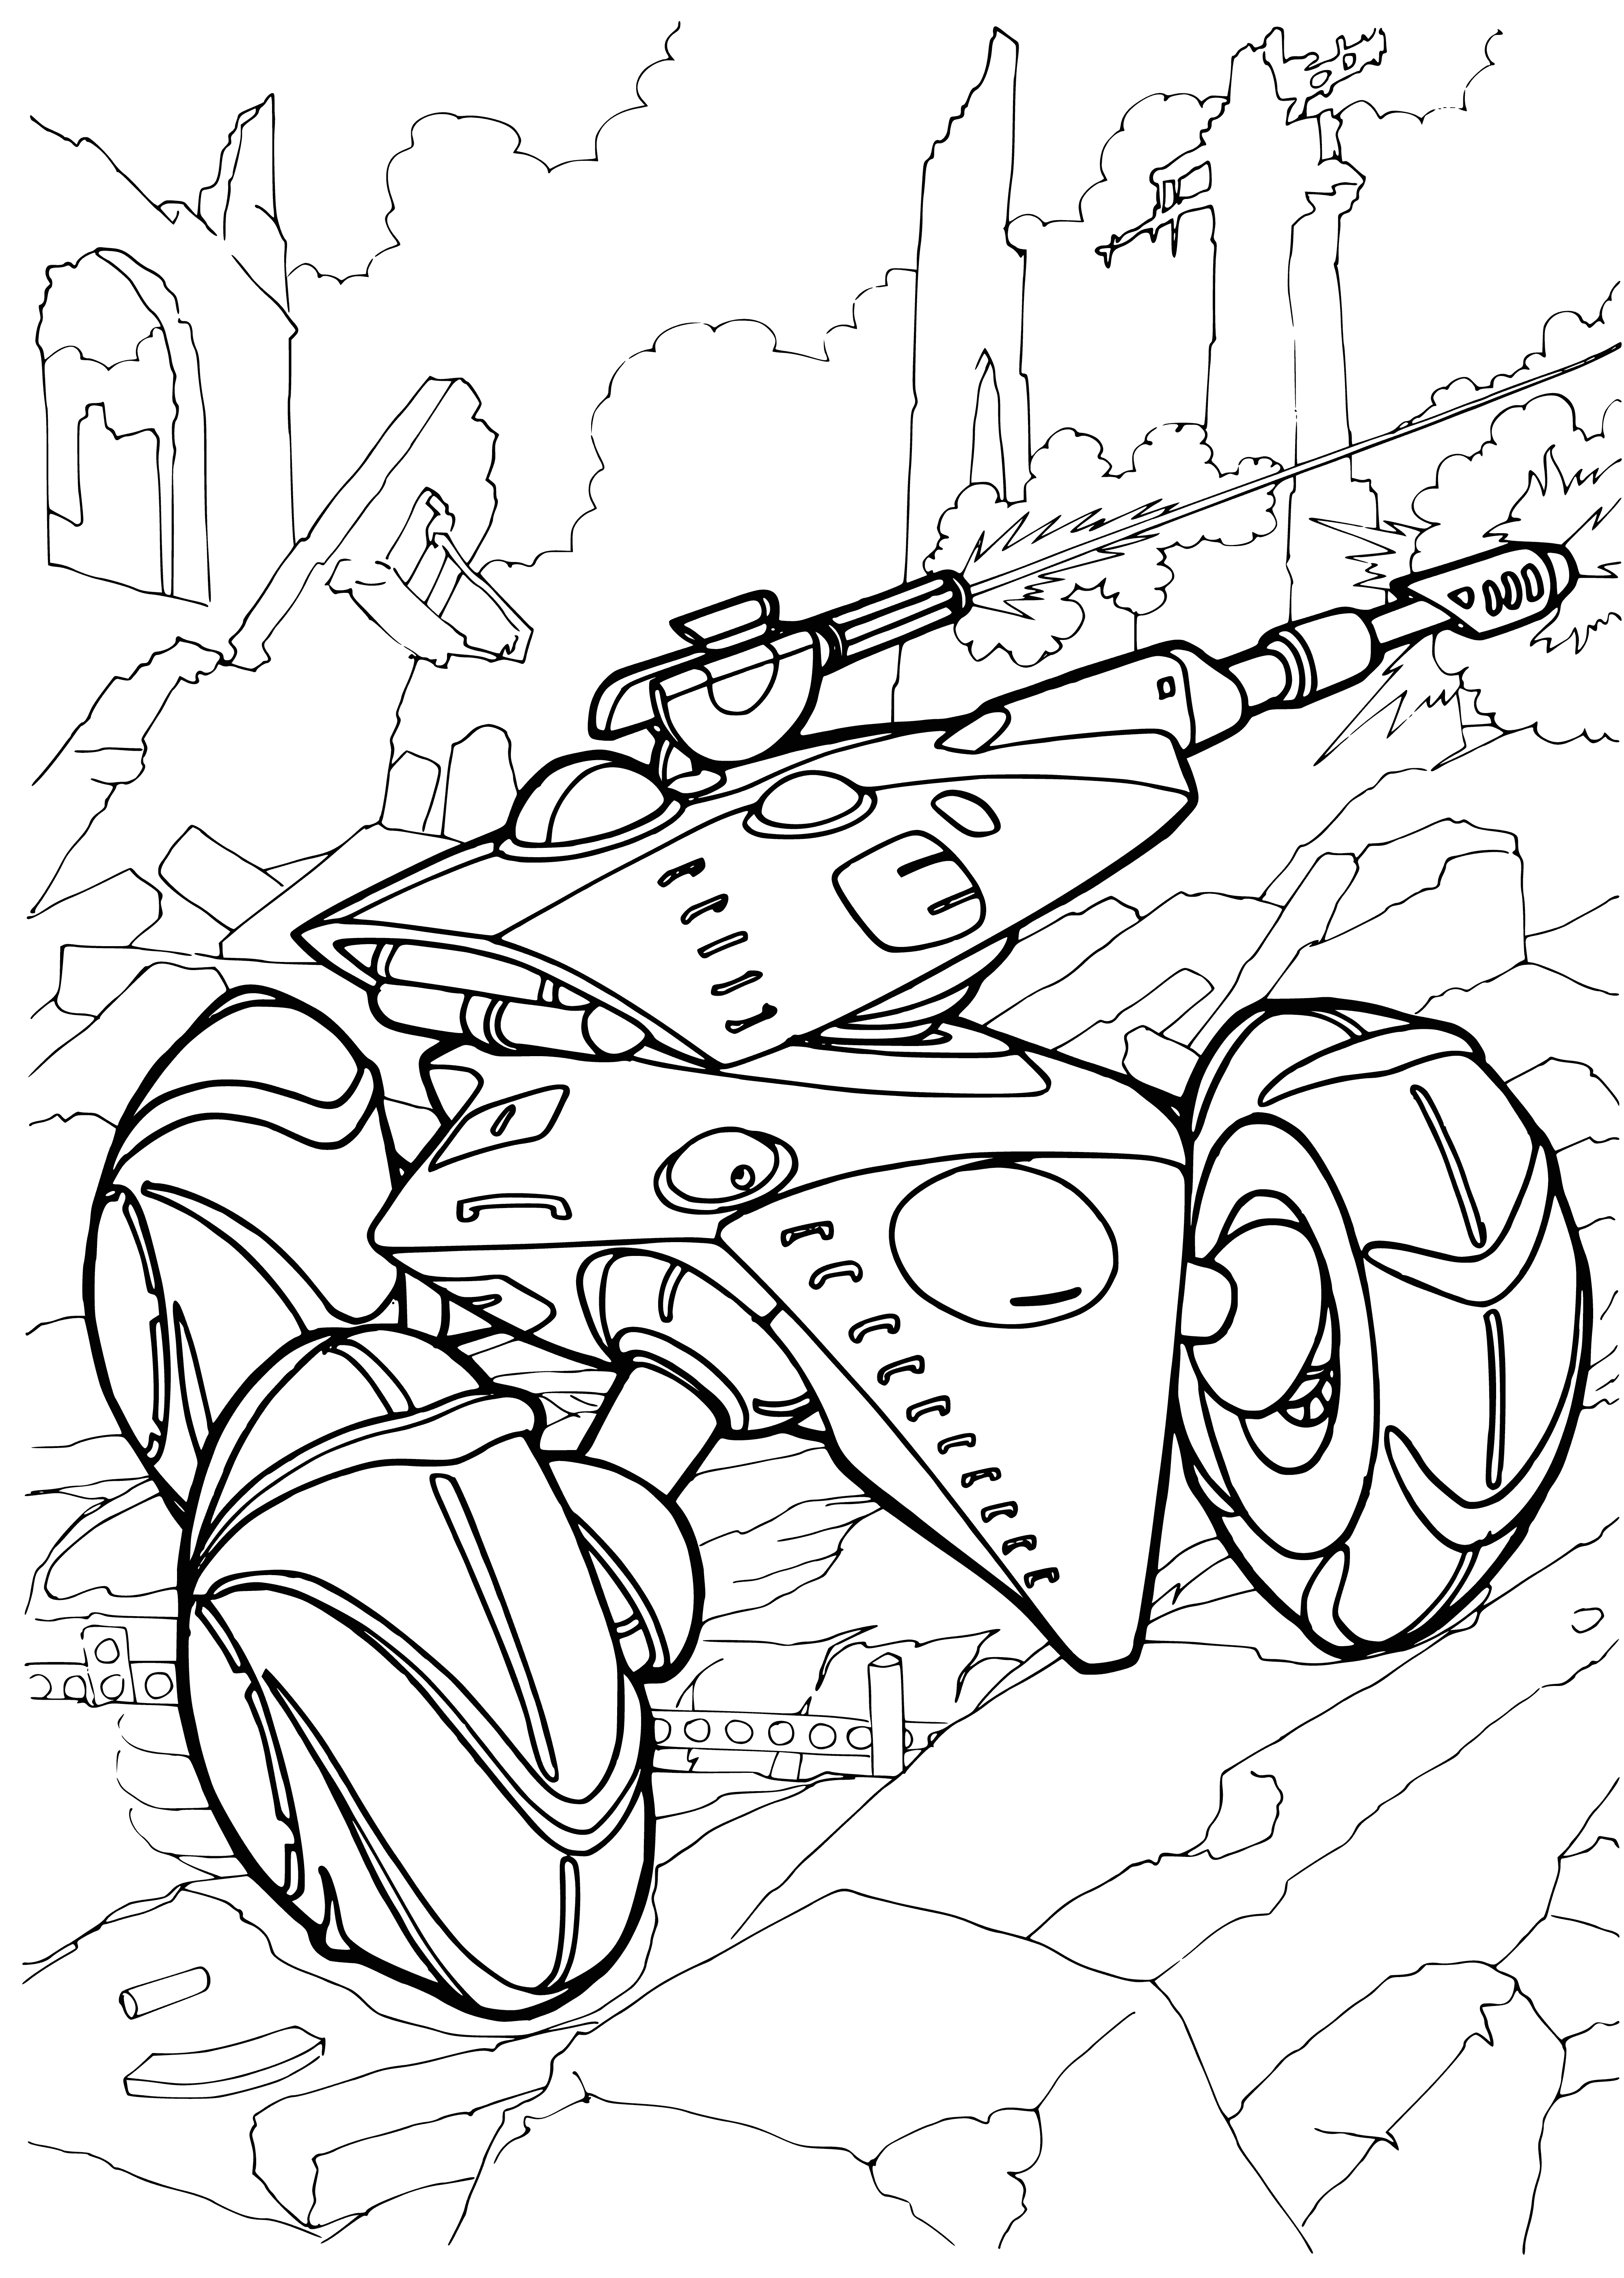 coloring page: Future wars will be fought with autonomous tanks with intelligent AI & powerful weapons, communicating & maneuvering to achieve victory.